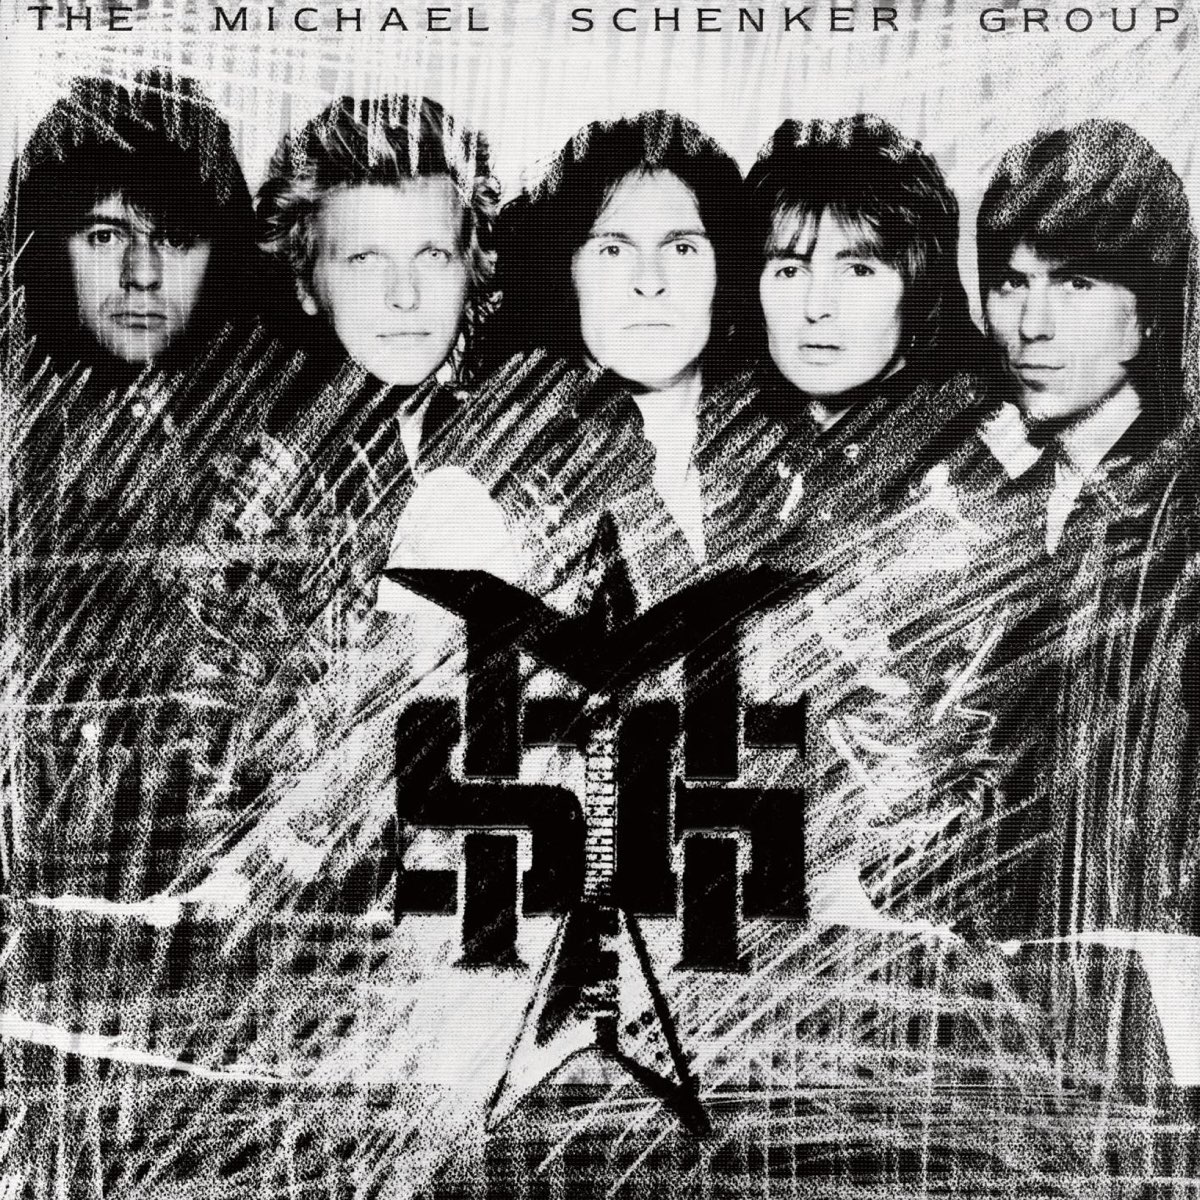 MSG (Deluxe Version) - Album by The Michael Schenker Group - Apple